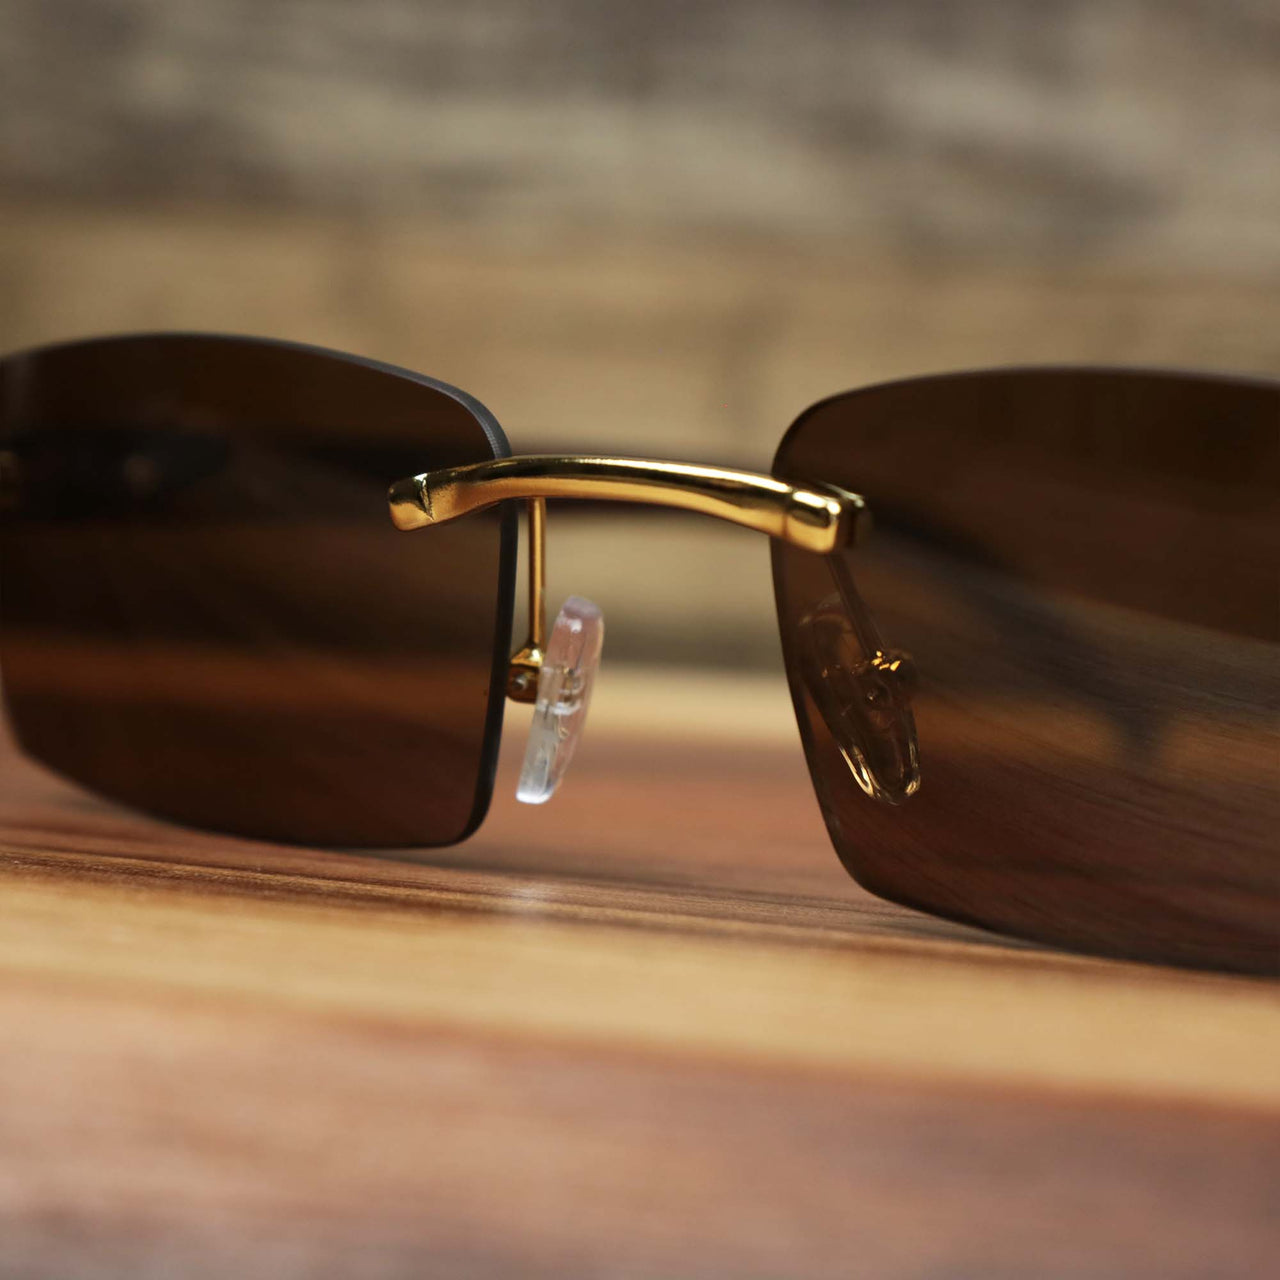 The bridge of the Rectangle Wood and Metal Frame Brown Lens Sunglasses with Gold Frame